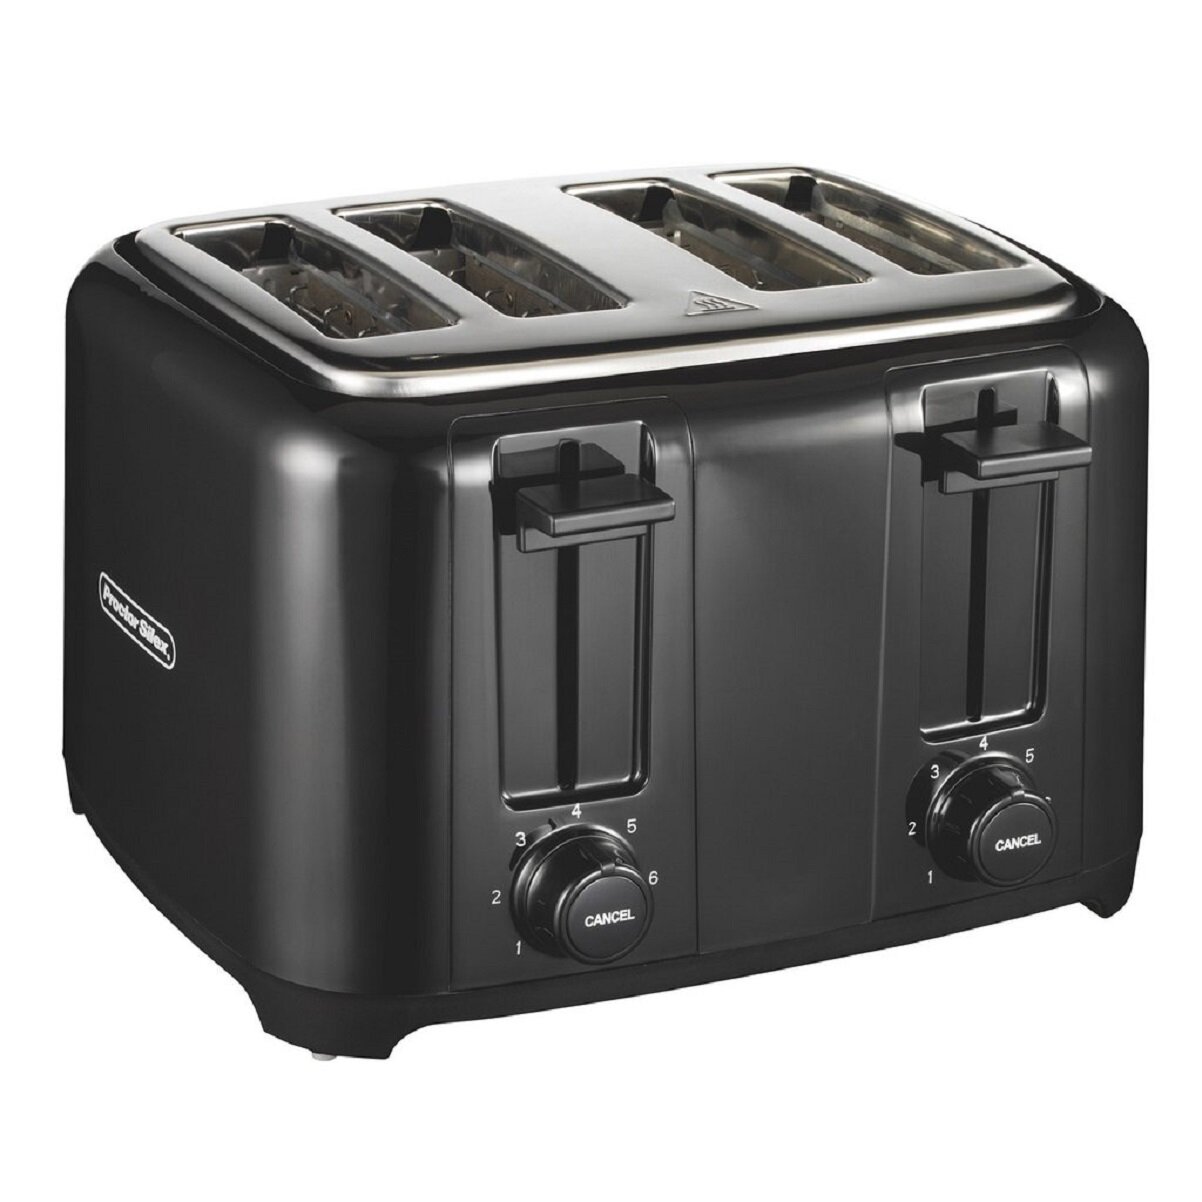 Hamilton Beach 4-Slice Extra-Wide Slot Toaster in Stainless Steel and Black